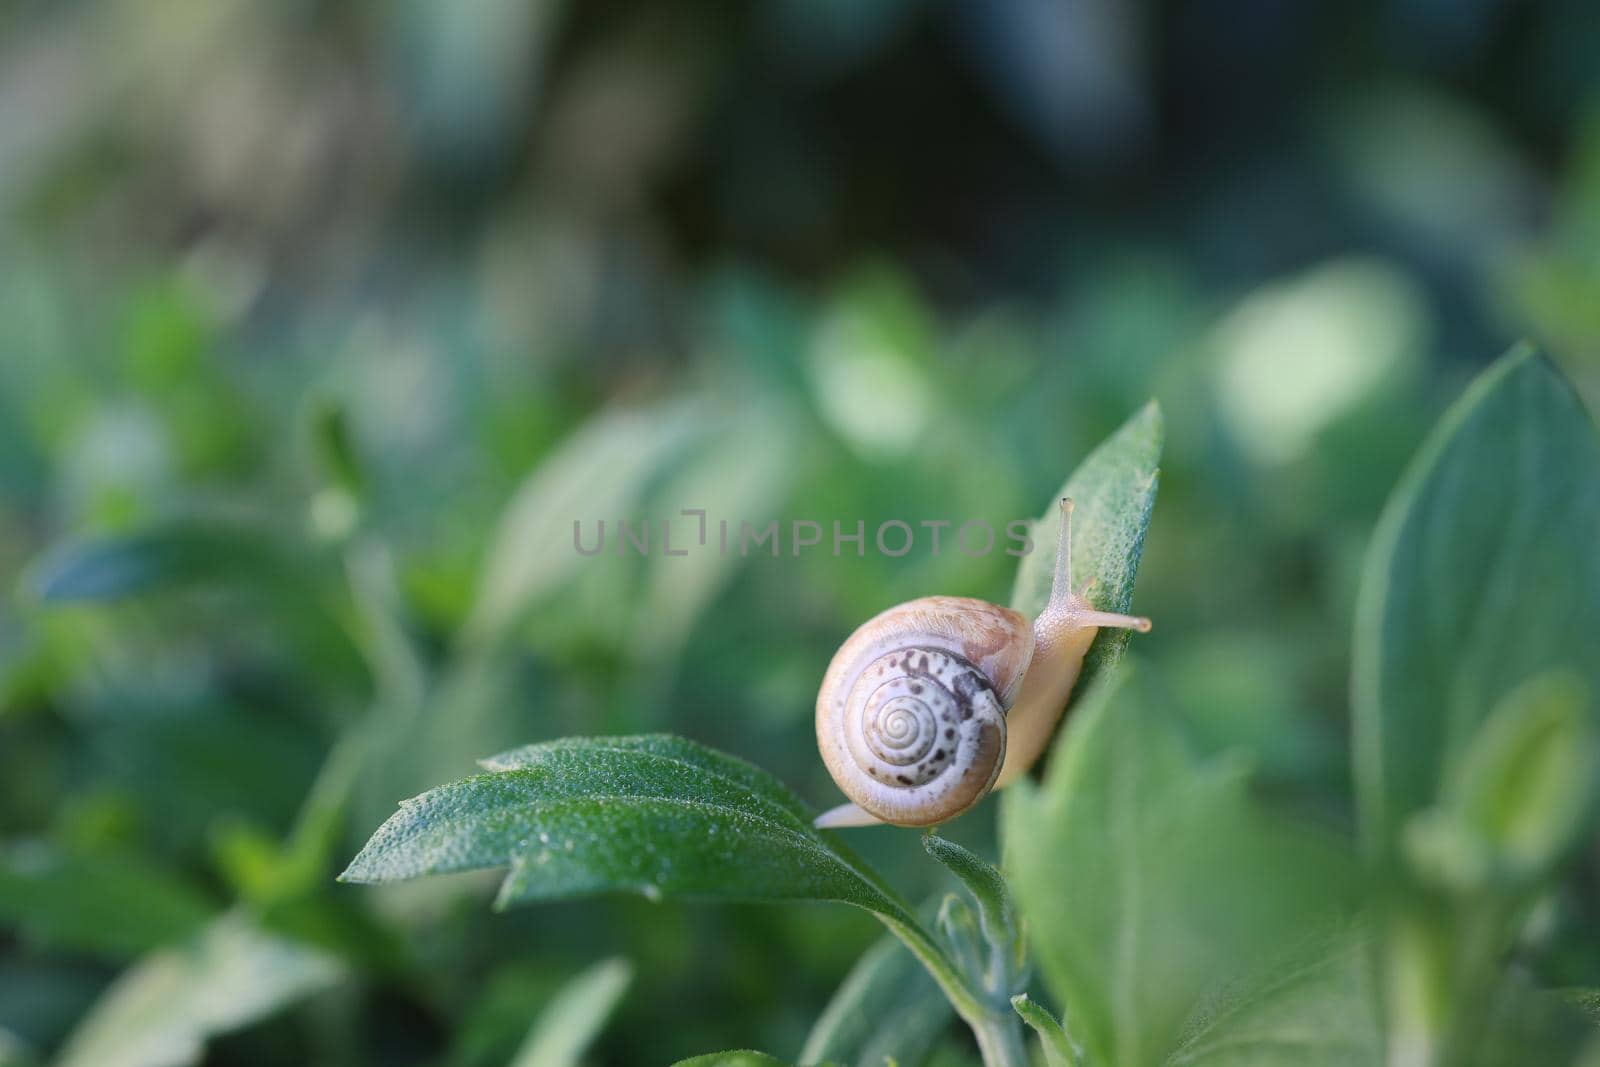 small snail in a shell crawls on the grass, a summer day in the garden. close up of small snail on plant leaf in garden outdoor, mollusk macro, nature, insect, animal